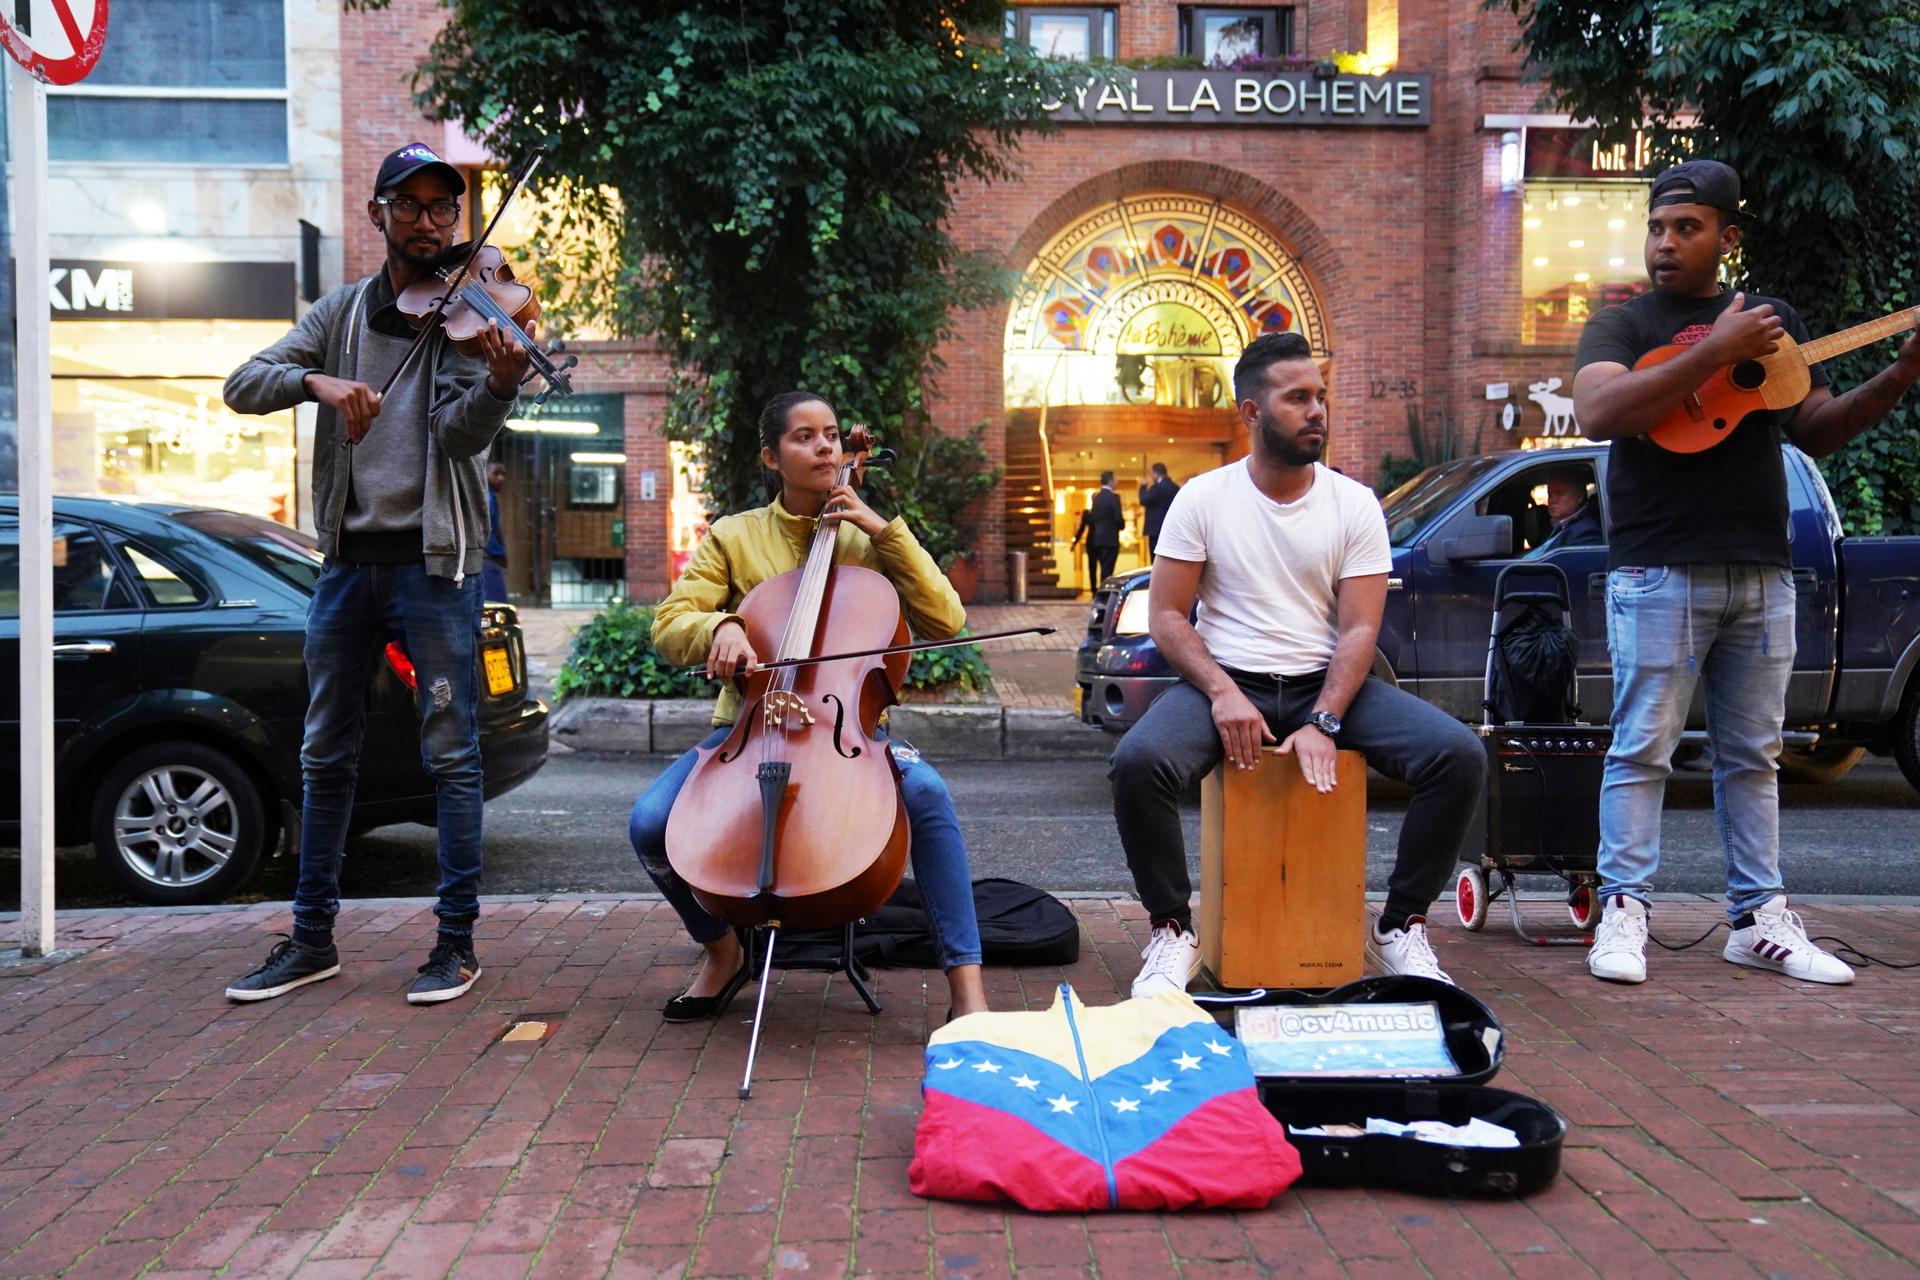 A group of musicians play music on the street. 